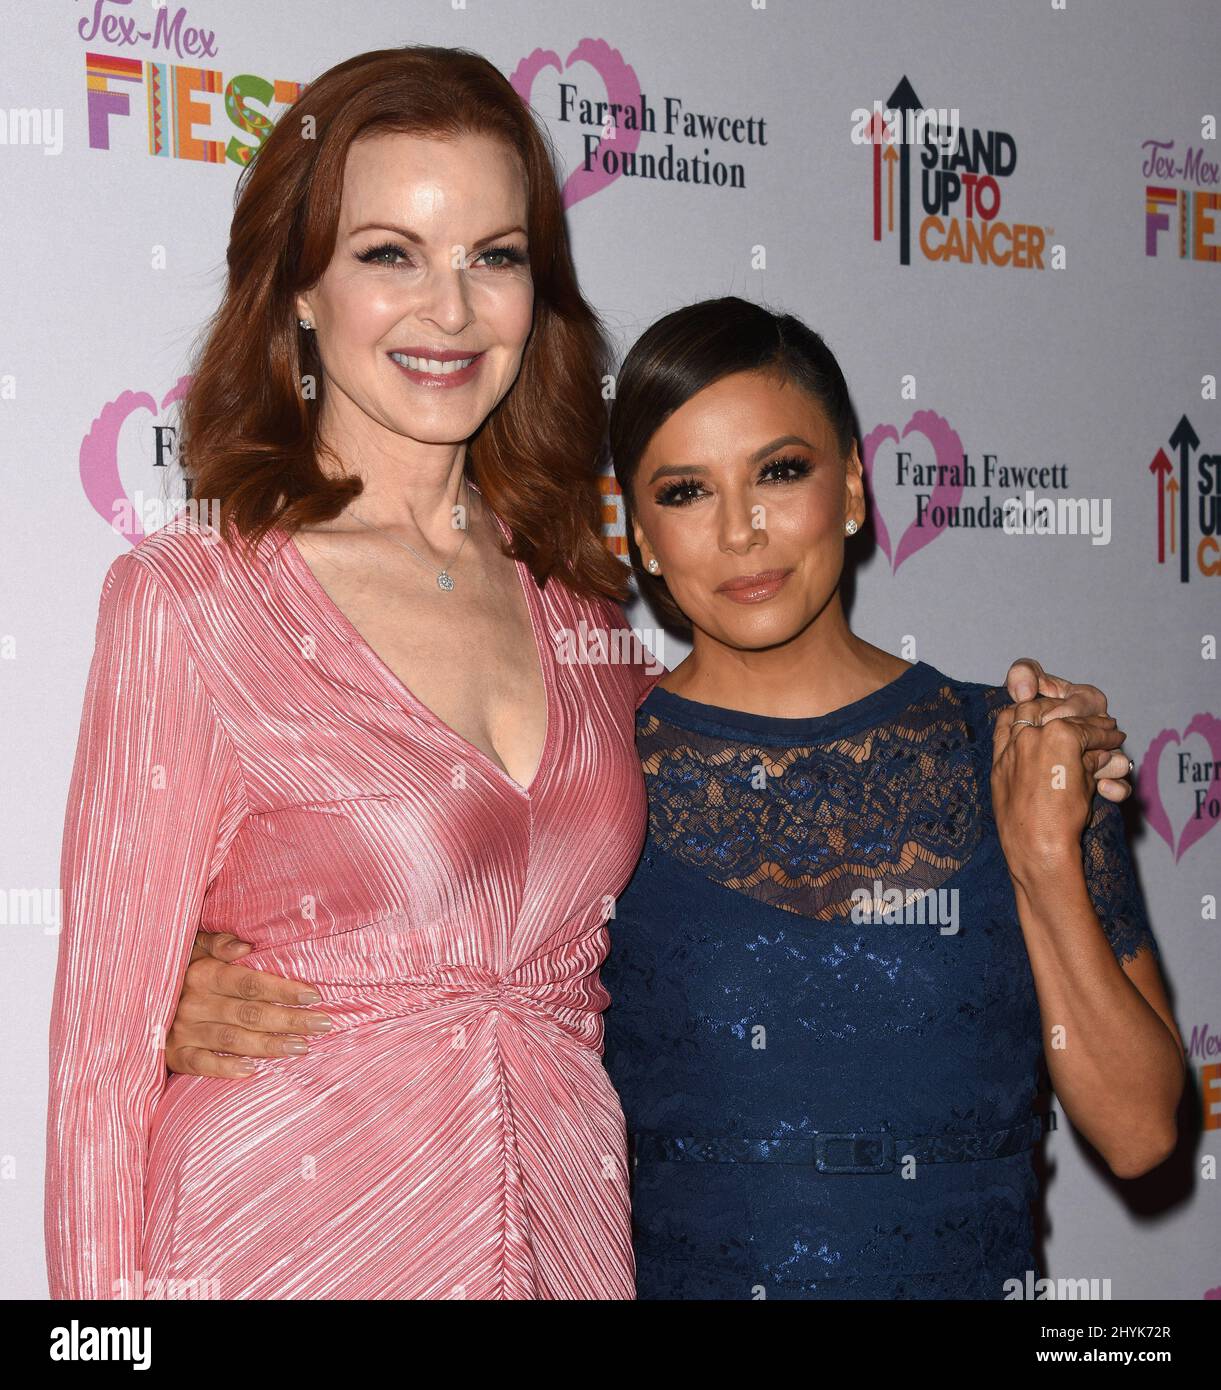 Marcia Cross and Eva Longoria at The Farrah Fawcett Foundation's Tex-Mex Fiesta held at the Wallis Annenberg Center for the Performing Arts on September 6, 2019 in Beverly Hills, USA. Stock Photo